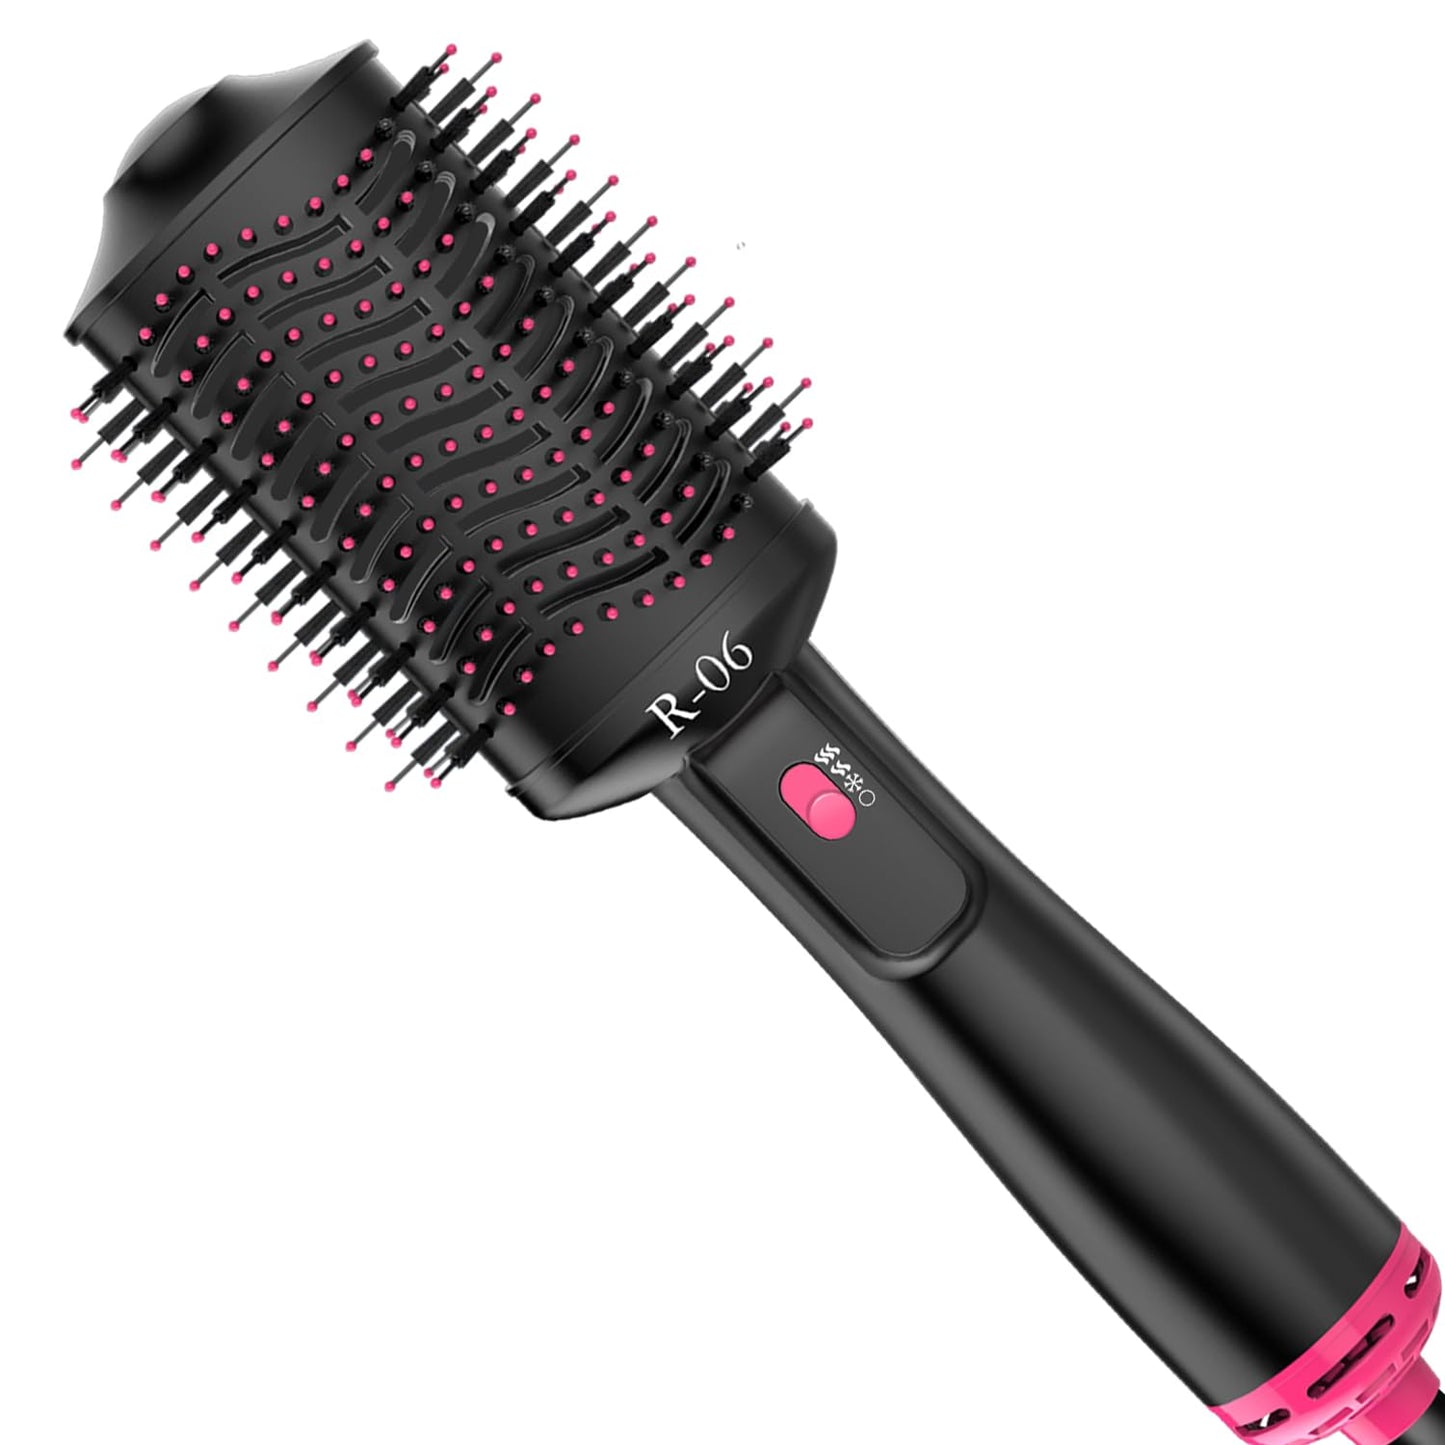 Hair Dryer Brush Blow Dryer Brush in One, 4 in 1 Hair Dryer and Styler Volumizer with Oval Barrel, Professional Salon Hot Air Brush for All Hair Types hair dryer hair dryer brush blow dryer blow dryer brush brush blow dryer 